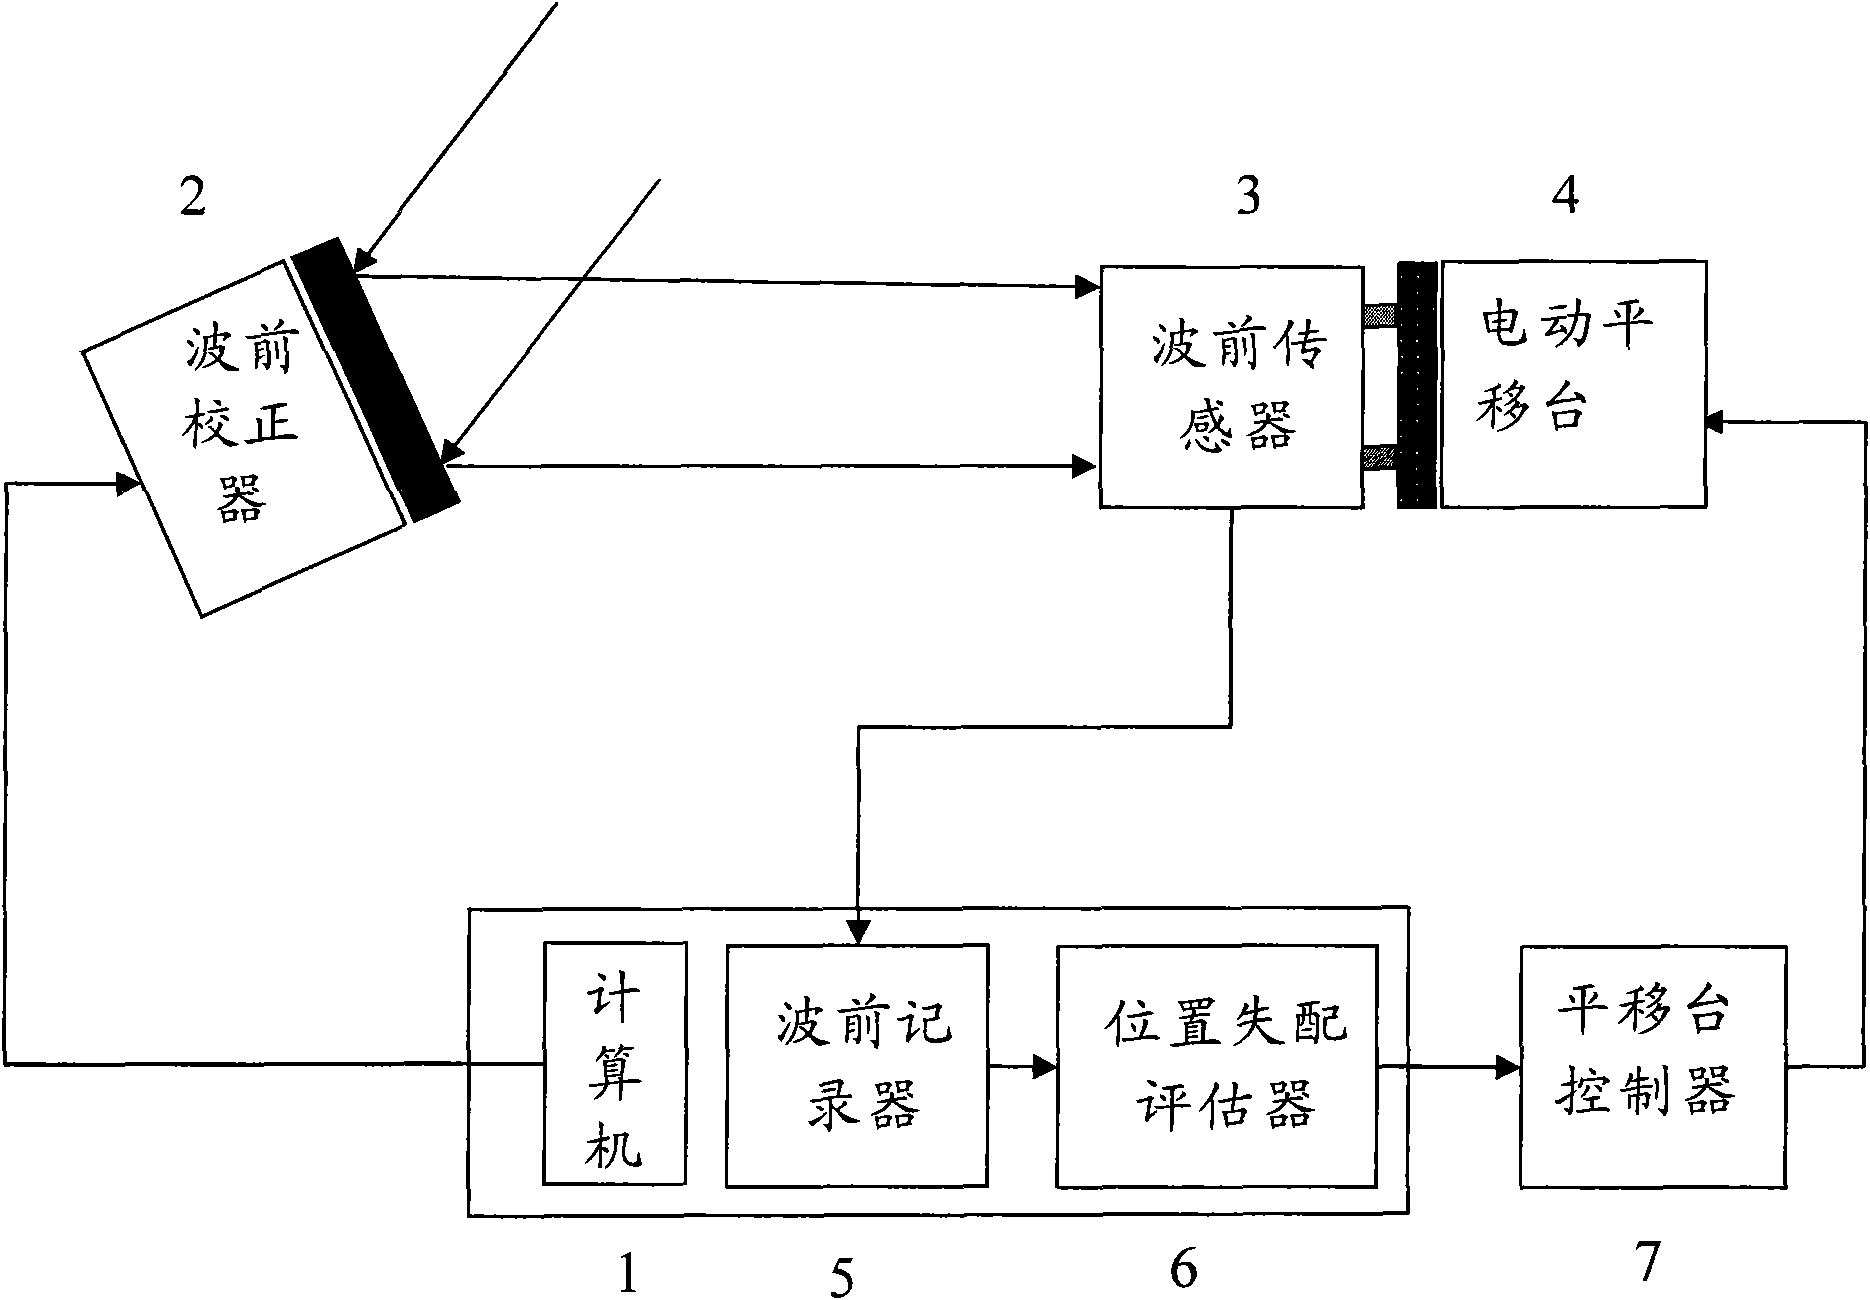 Wave-front sensor and corrector aligning device in self-adaptive optical system